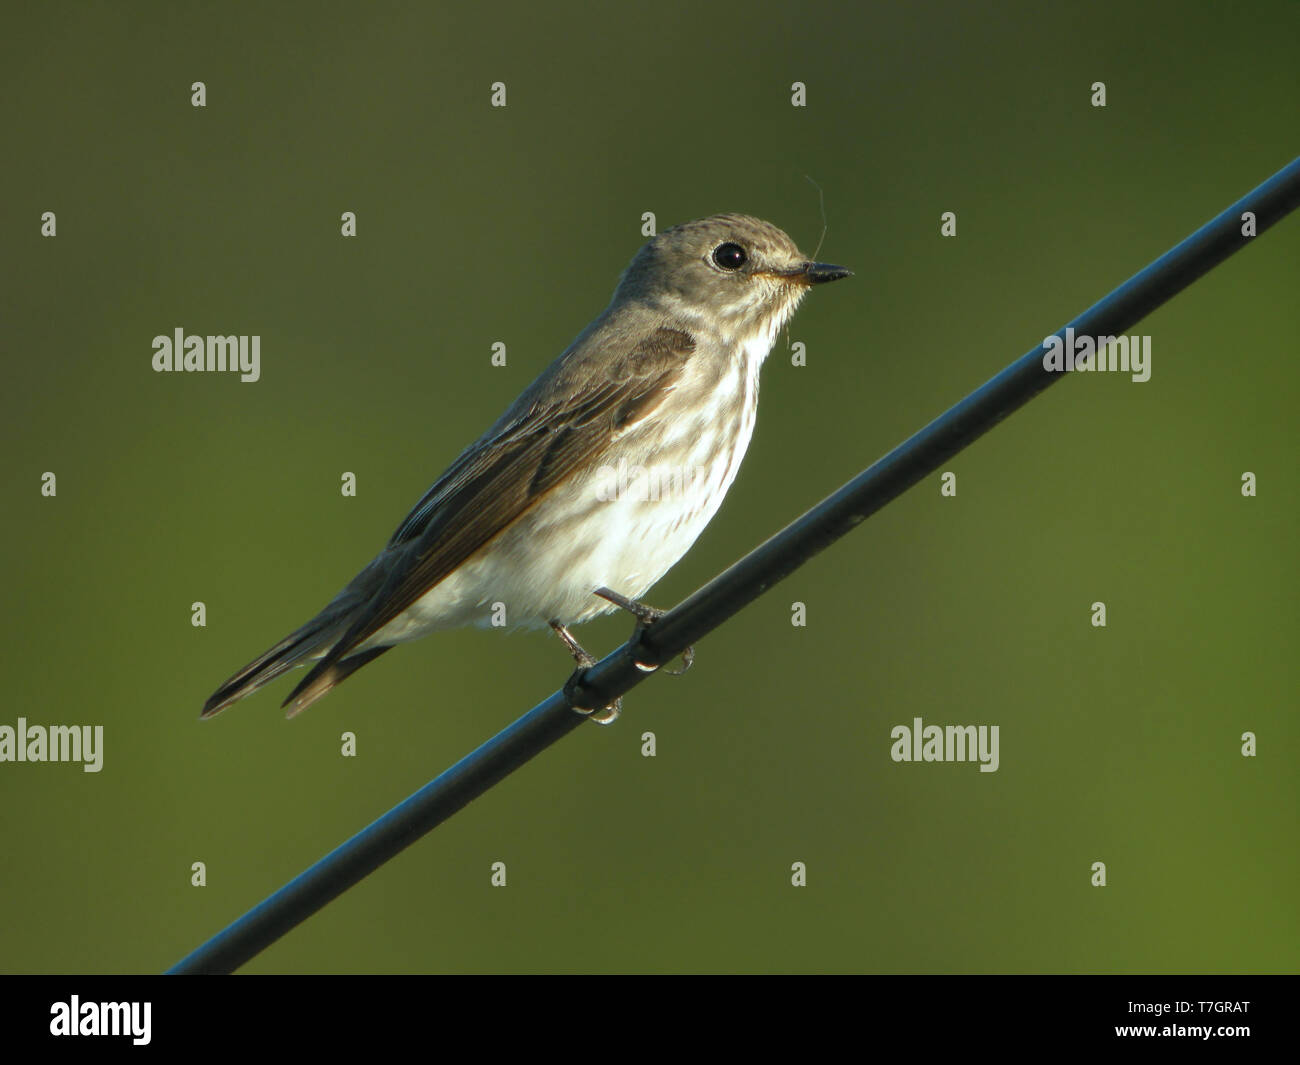 Grey-streaked Flycatcher (Muscicapa griseisticta) on Heuksan do island - South Korea. Perched on a wire. Stock Photo